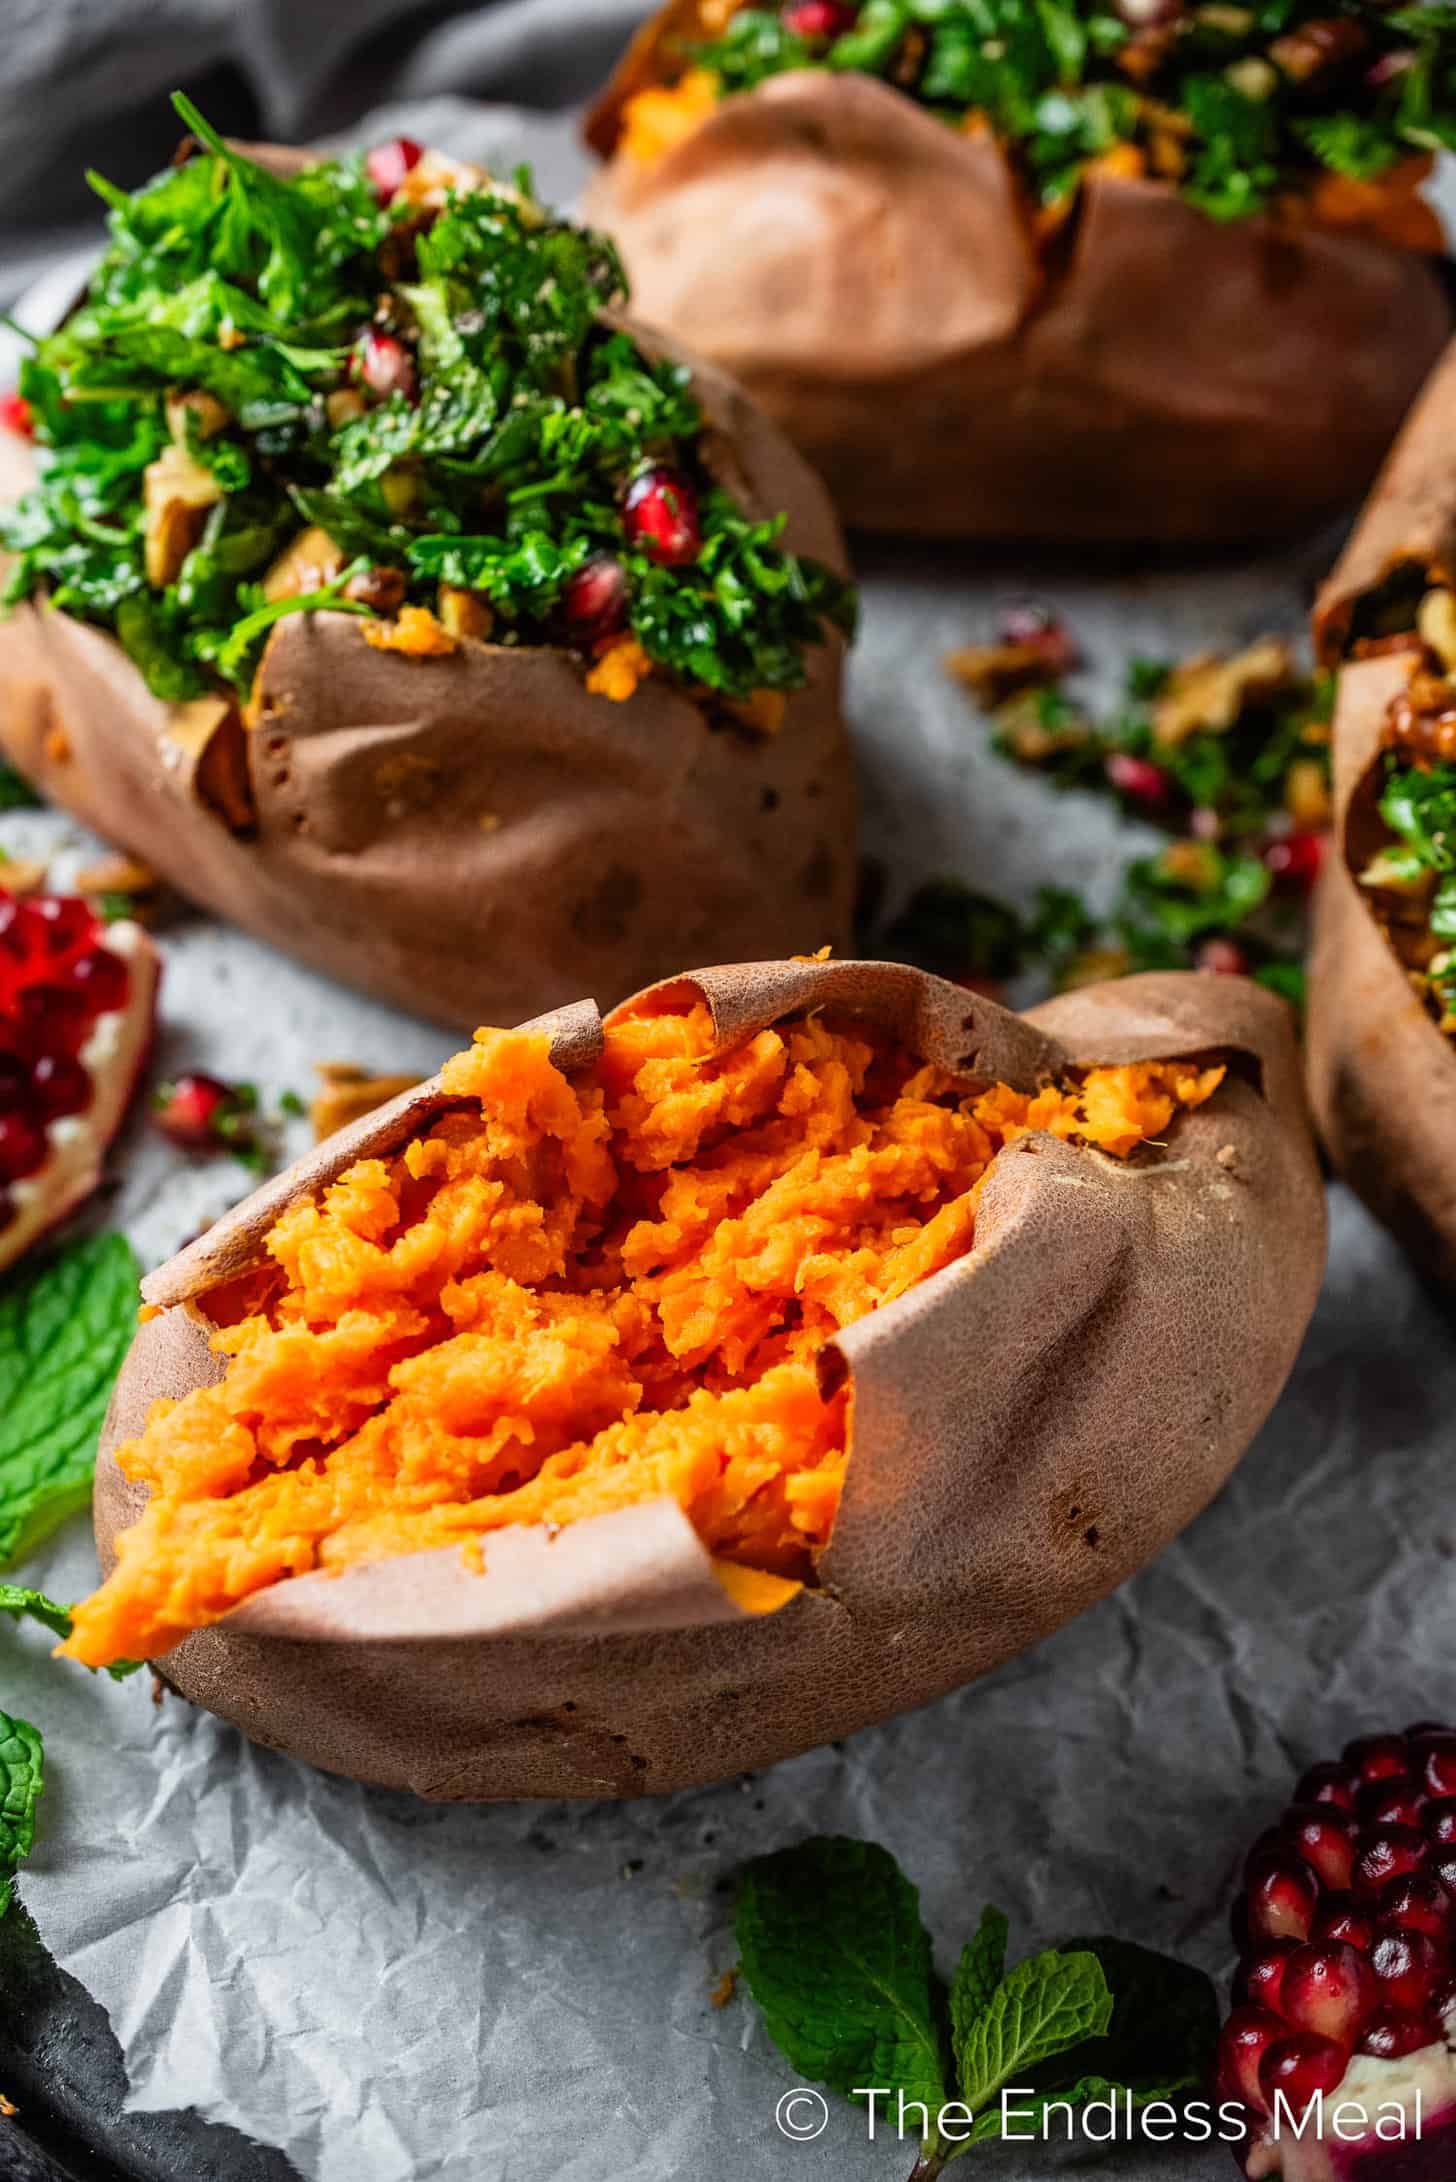 A close up of a baked sweet potato with pomegranates on the side